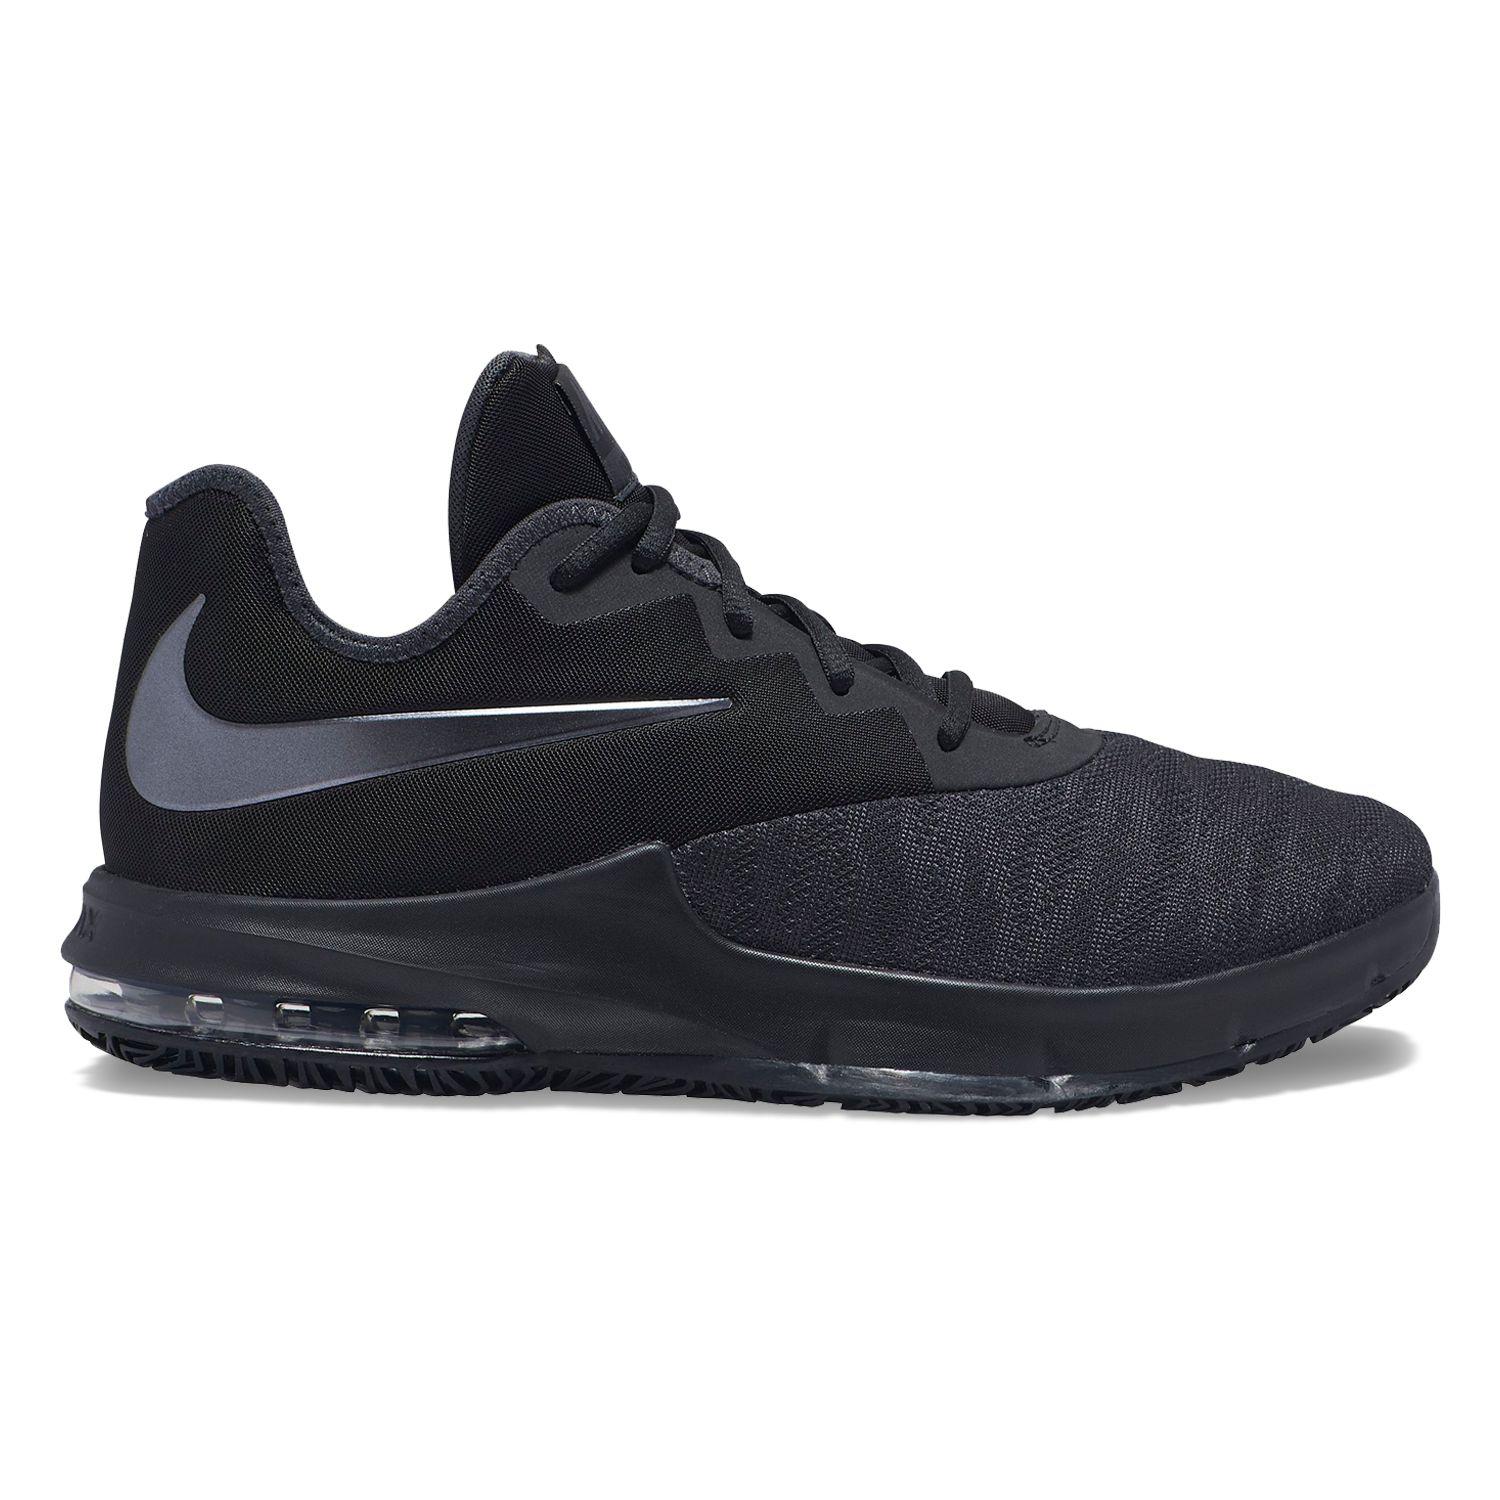 nike air max low basketball shoes